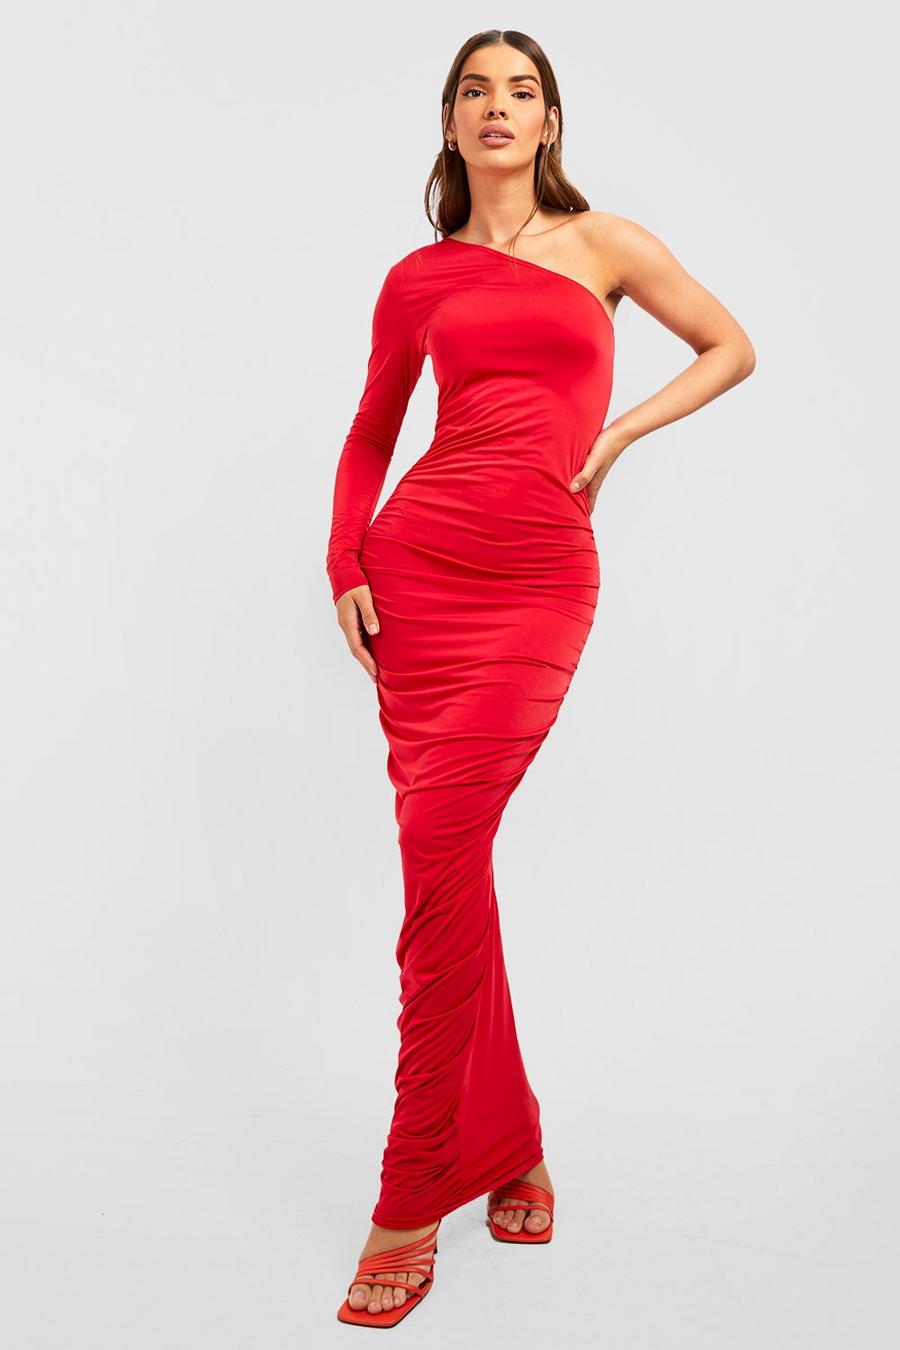 Red One Shoulder Slinky Ruched Maxi Dress